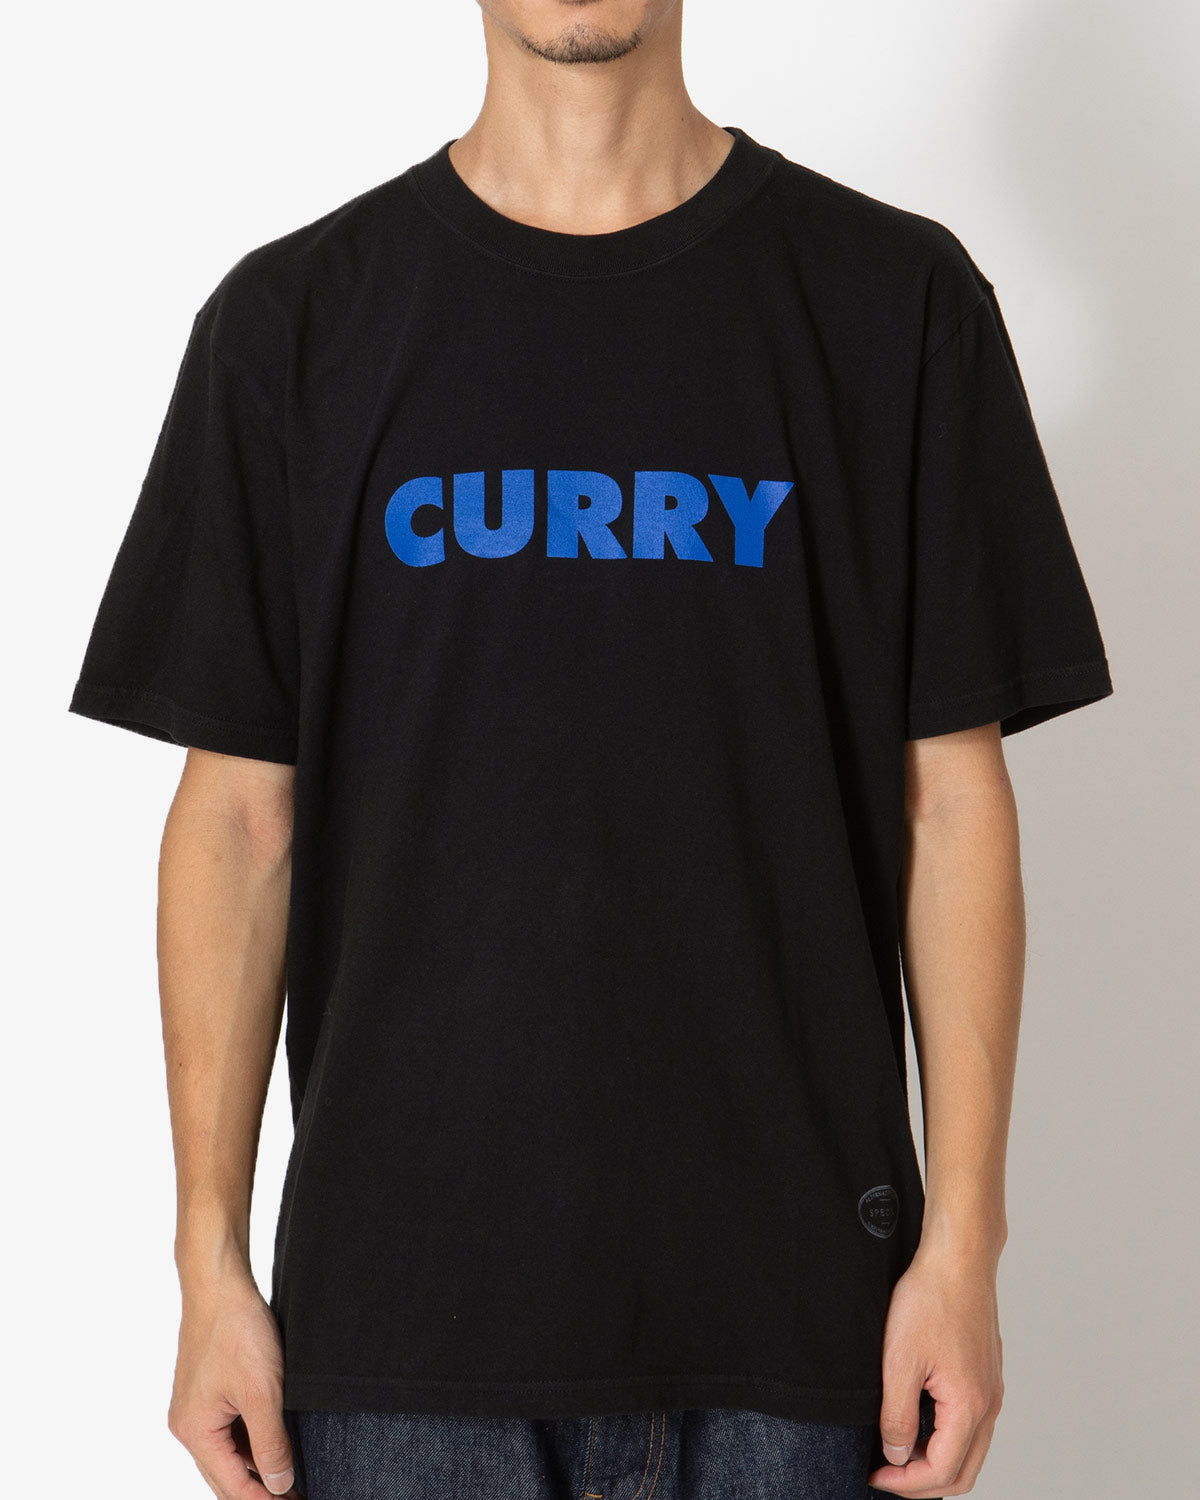 CURRY - BLUE